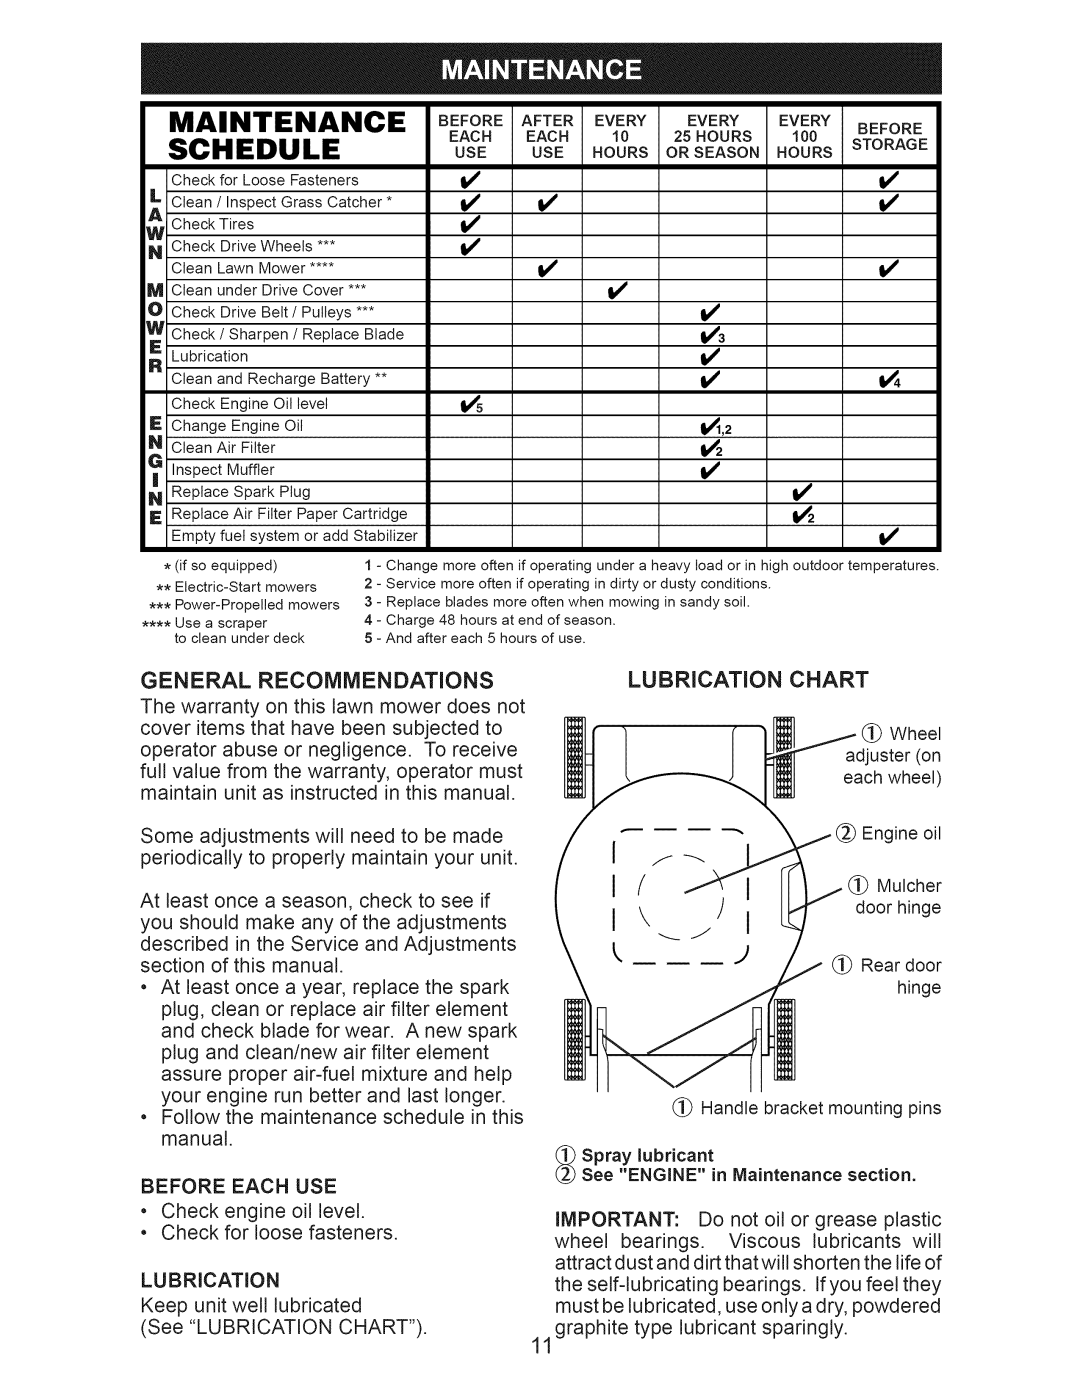 Craftsman 917.389060 manual Maintenance, Schedule, Use Hours 